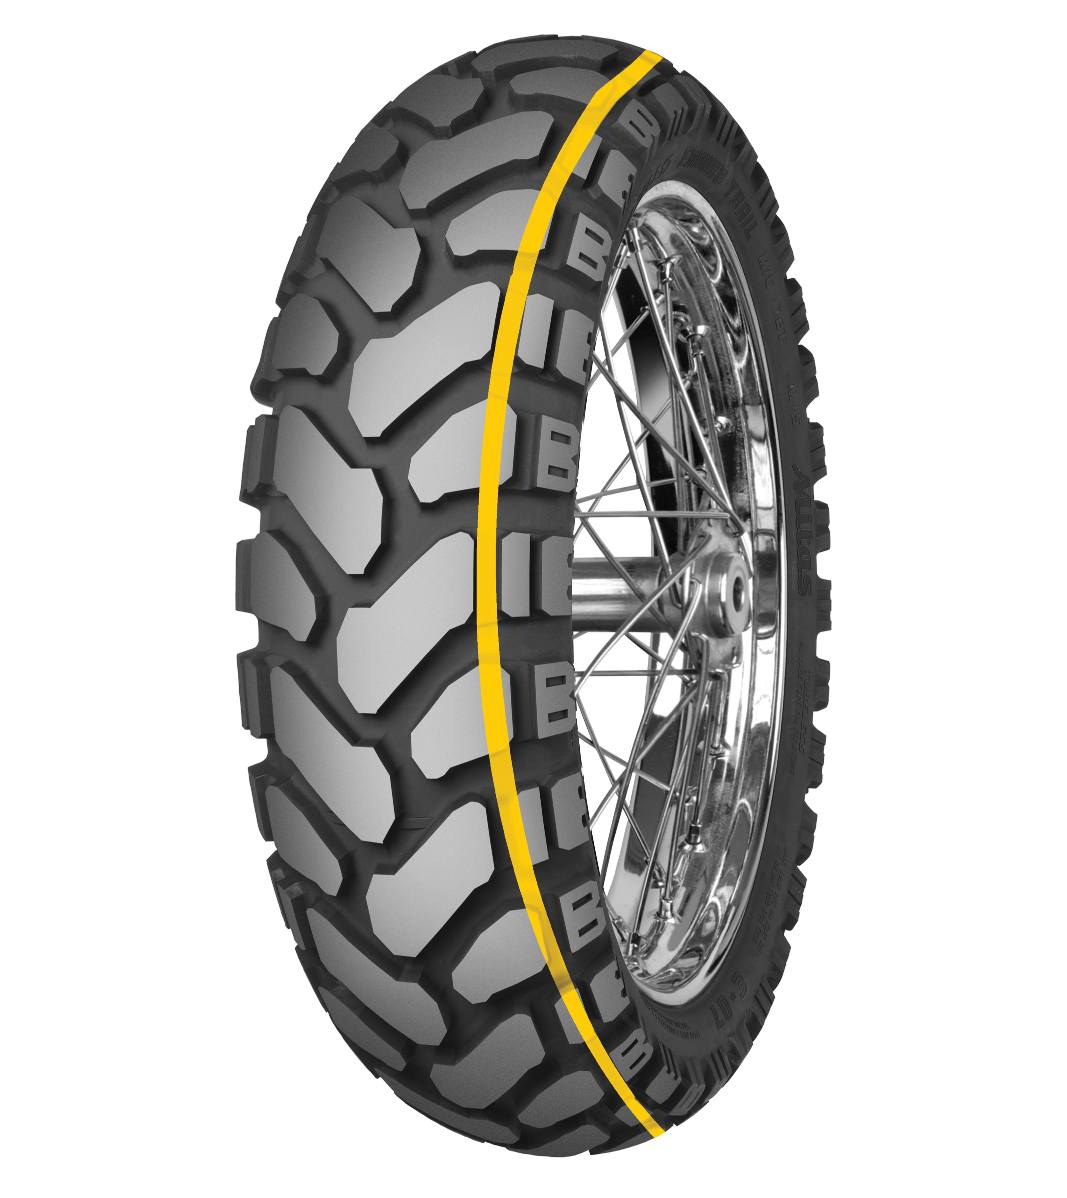 Mitas E-07+ ENDURO TRAIL 170/60B17 Trail ON Trail DAKAR 72T Yellow Tubeless Rear Tire, 224030, 170/60B17, Adventure Touring, E Series, E-07+ Enduro Trail, Rear, Trail, Trail ON, Tires - Imported and distributed in North & South America by Lindeco Genuine Powersports - Premier Powersports Equipment and Accessories for Motorcycle Enthusiasts, Professional Riders and Dealers.